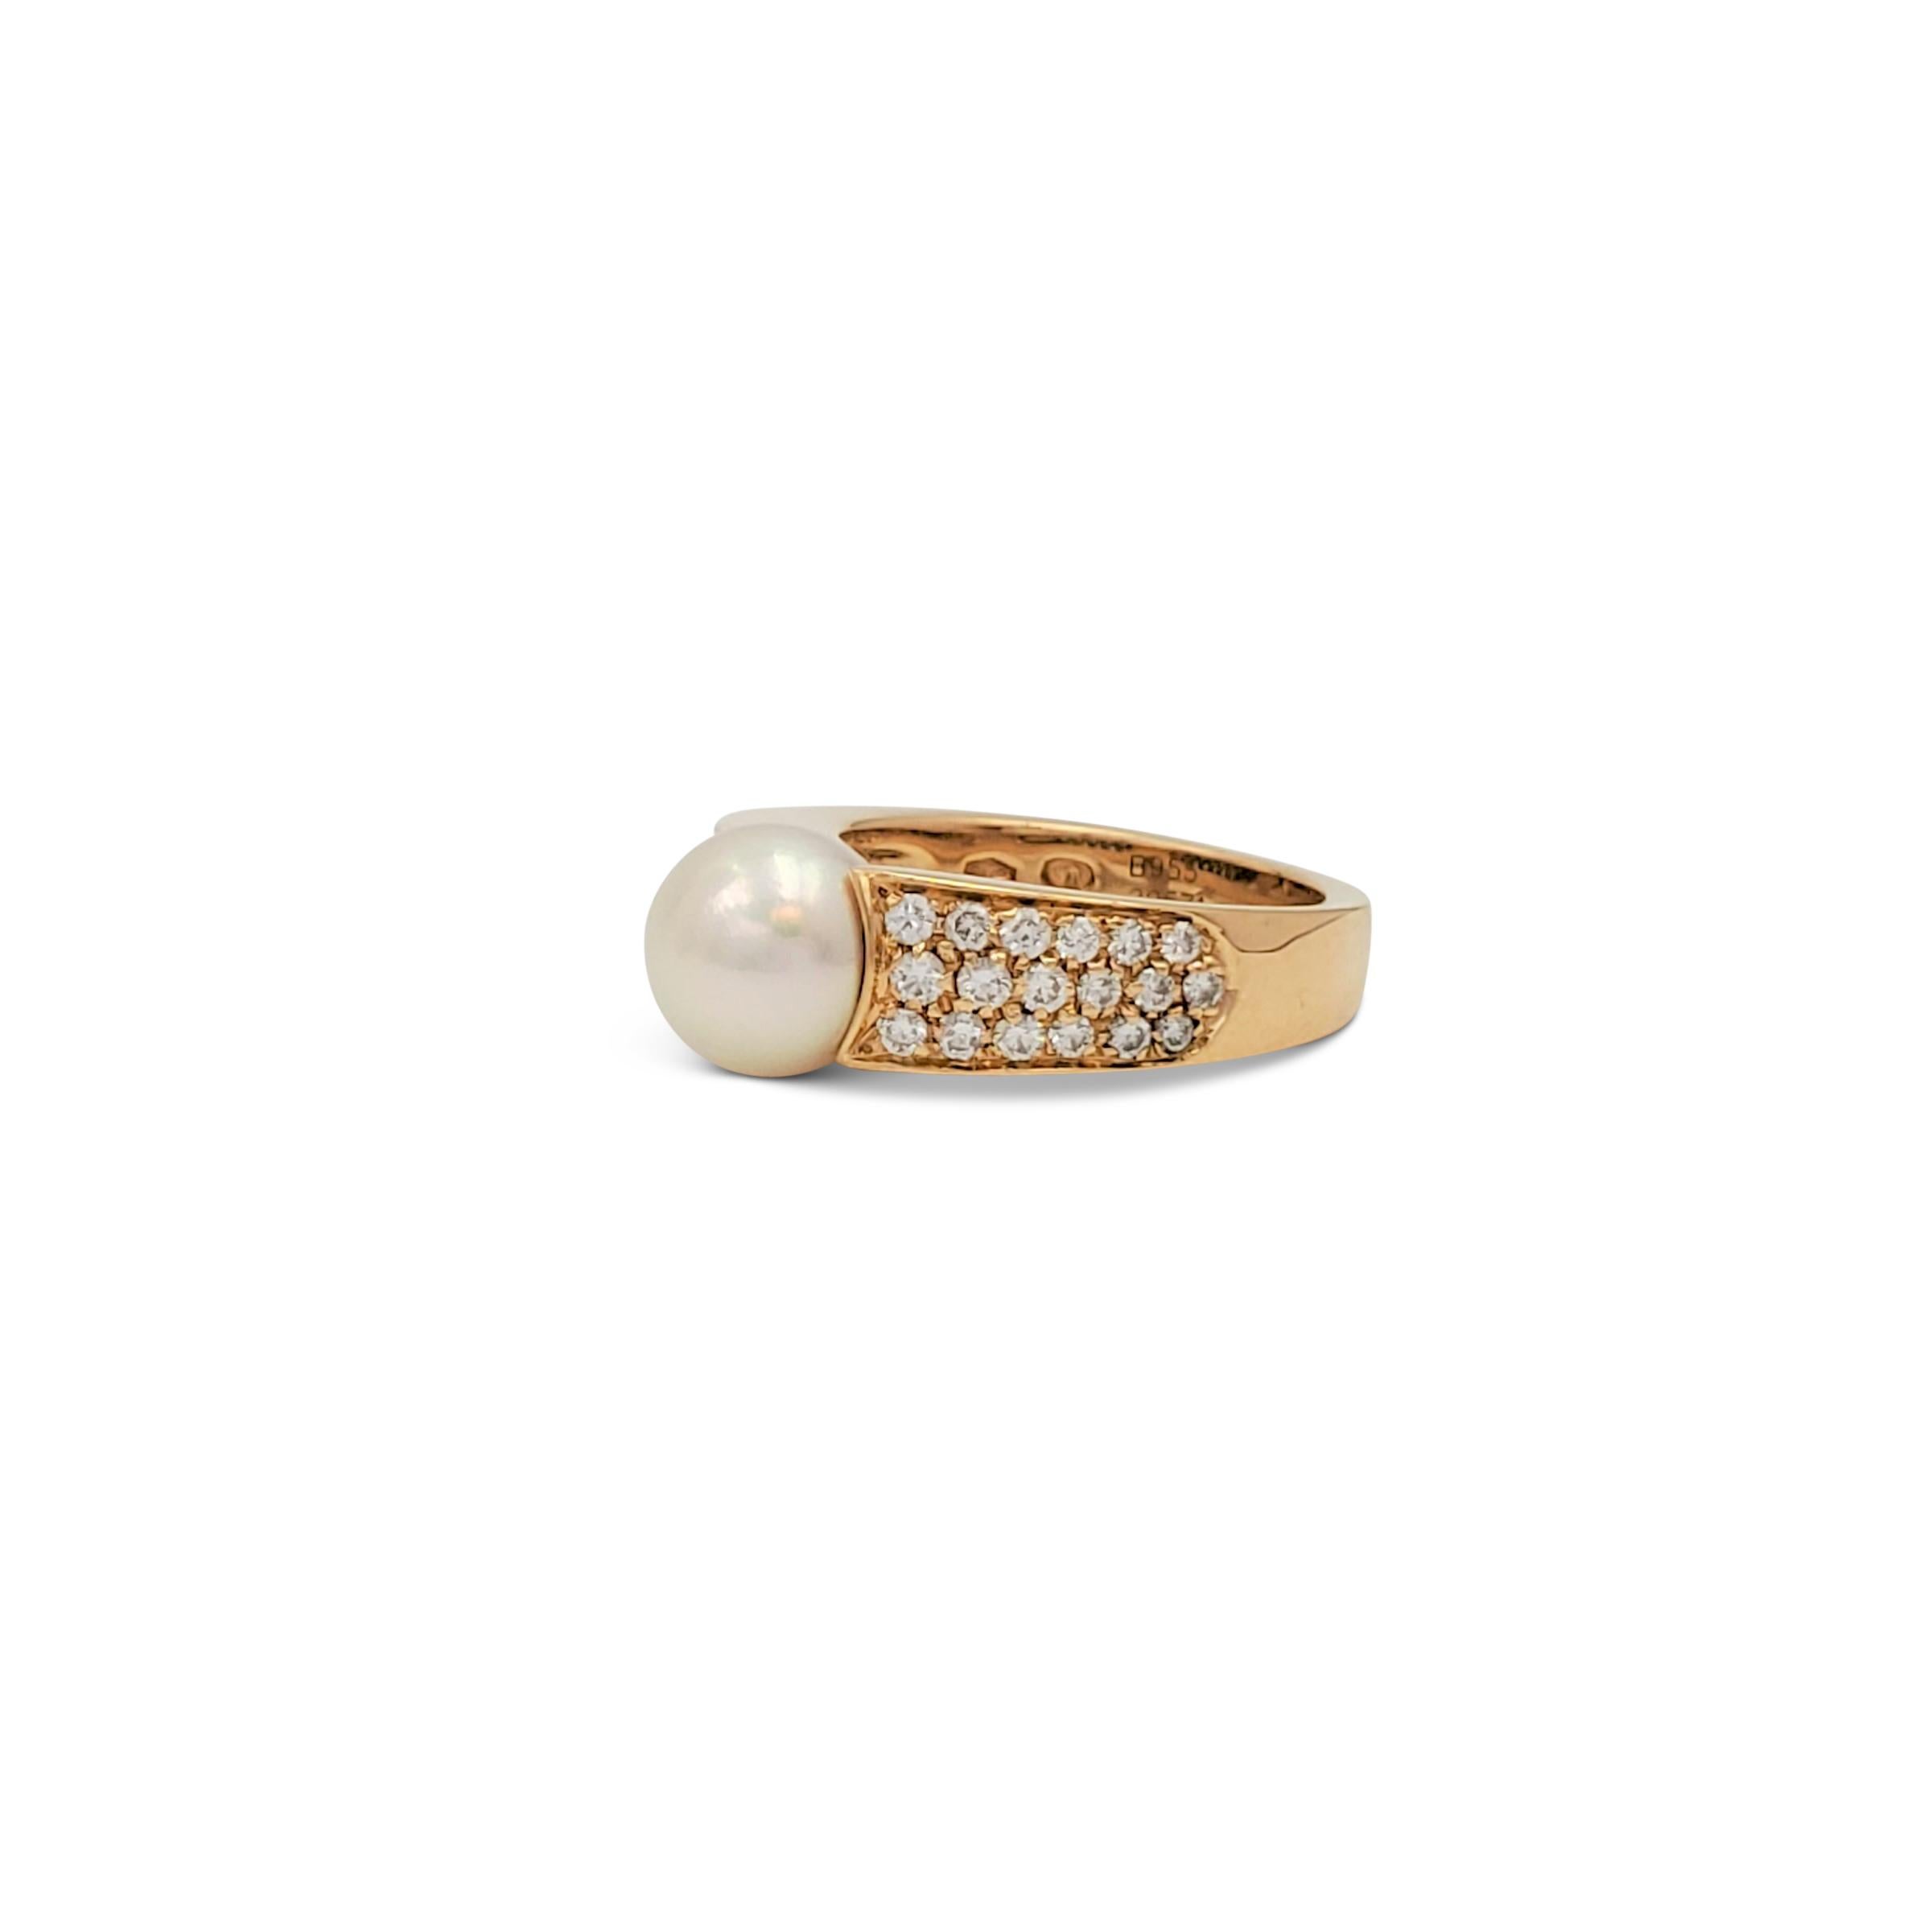 Authentic vintage Boucheron ring crafted in 18 karat yellow gold centers on a white-cream colored 8.5 mm cultured pearl. The shoulders of the ring are set with an estimated 0.40 carats of round brilliant cut diamonds (E-F. VS). Signed Boucheron,